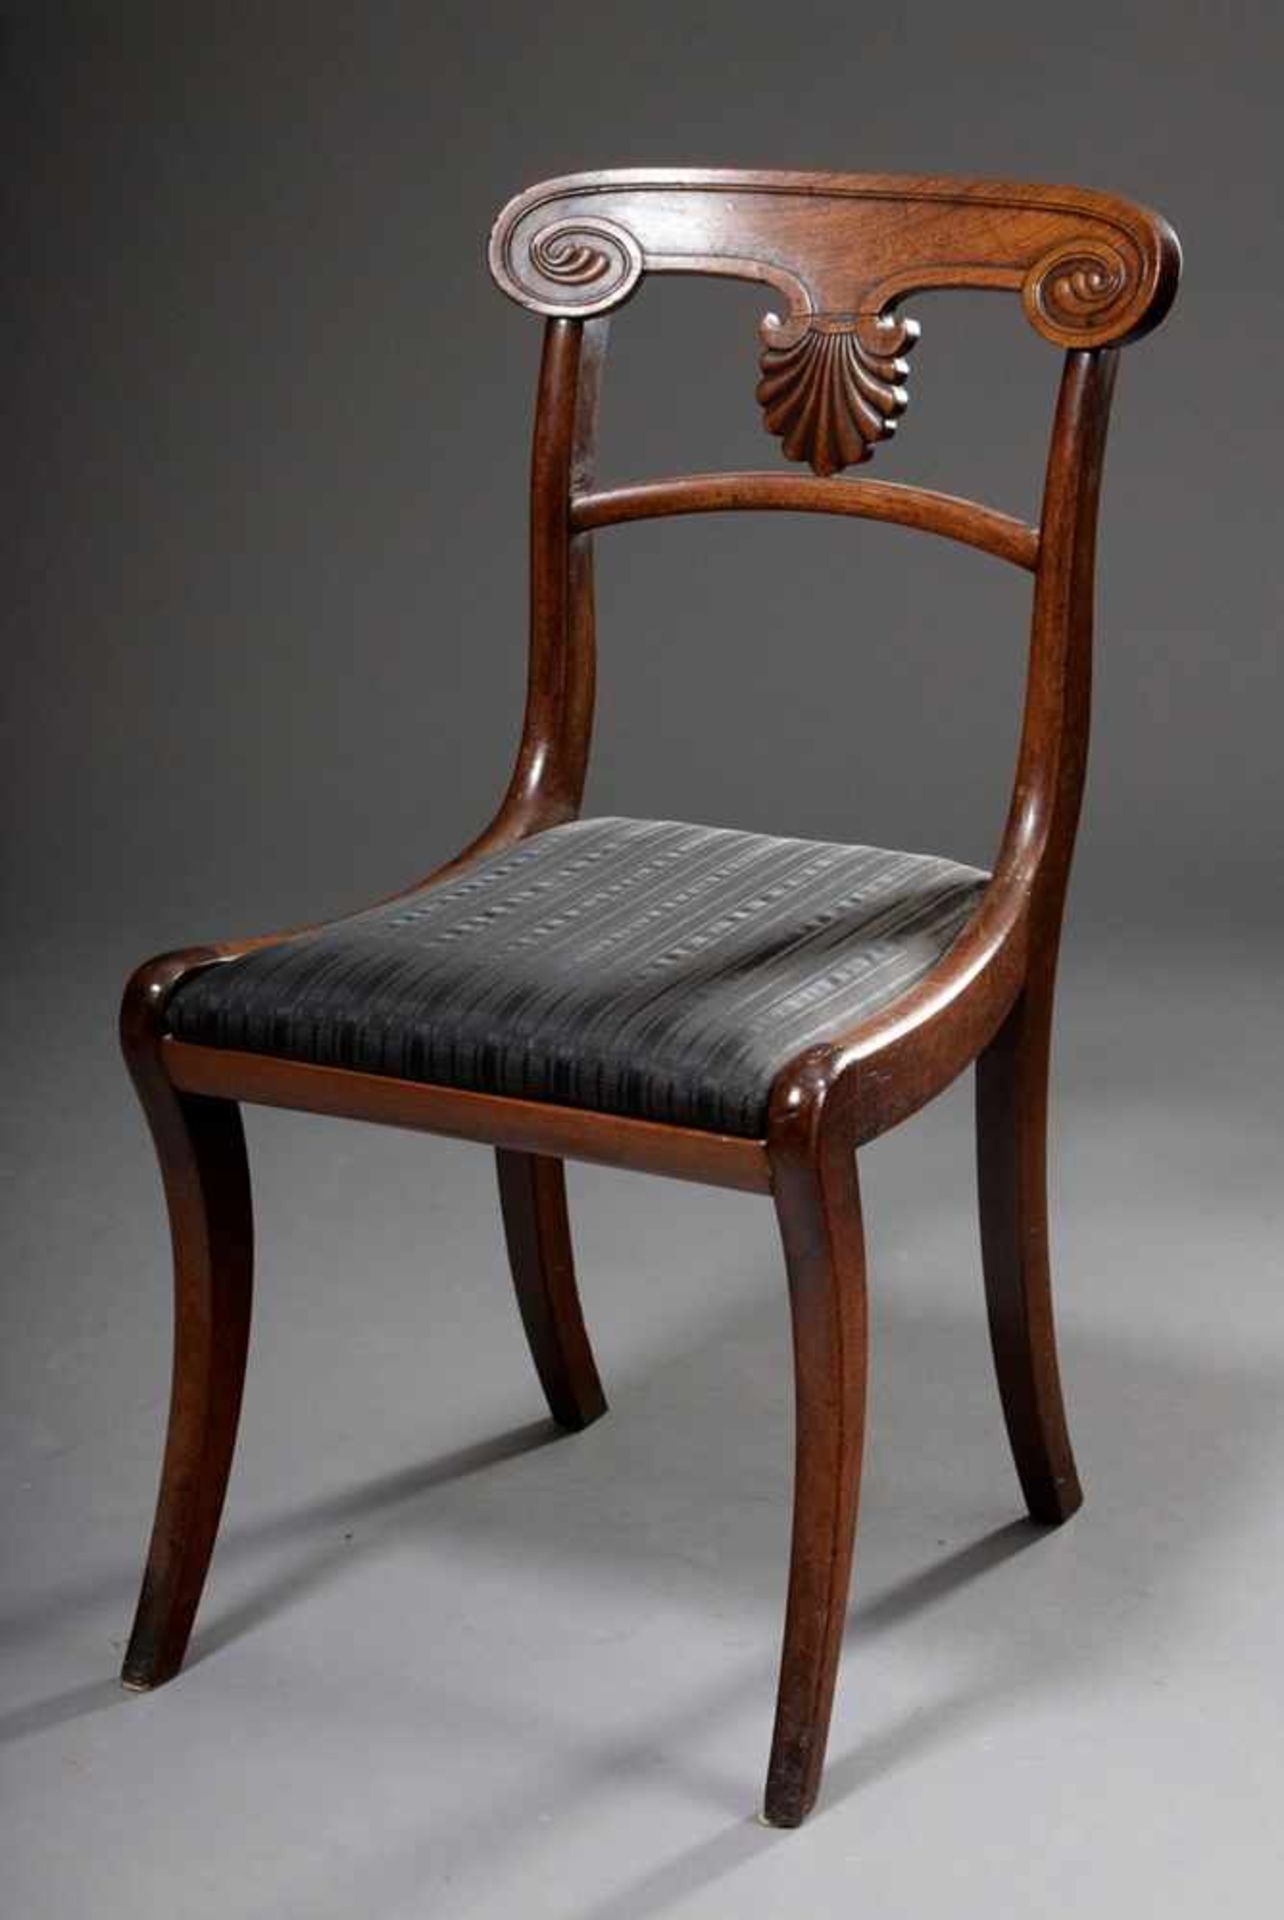 5 English Sheraton chairs with carved backrests and sabre legs, 1x with armrests, mahogany, - Image 3 of 7